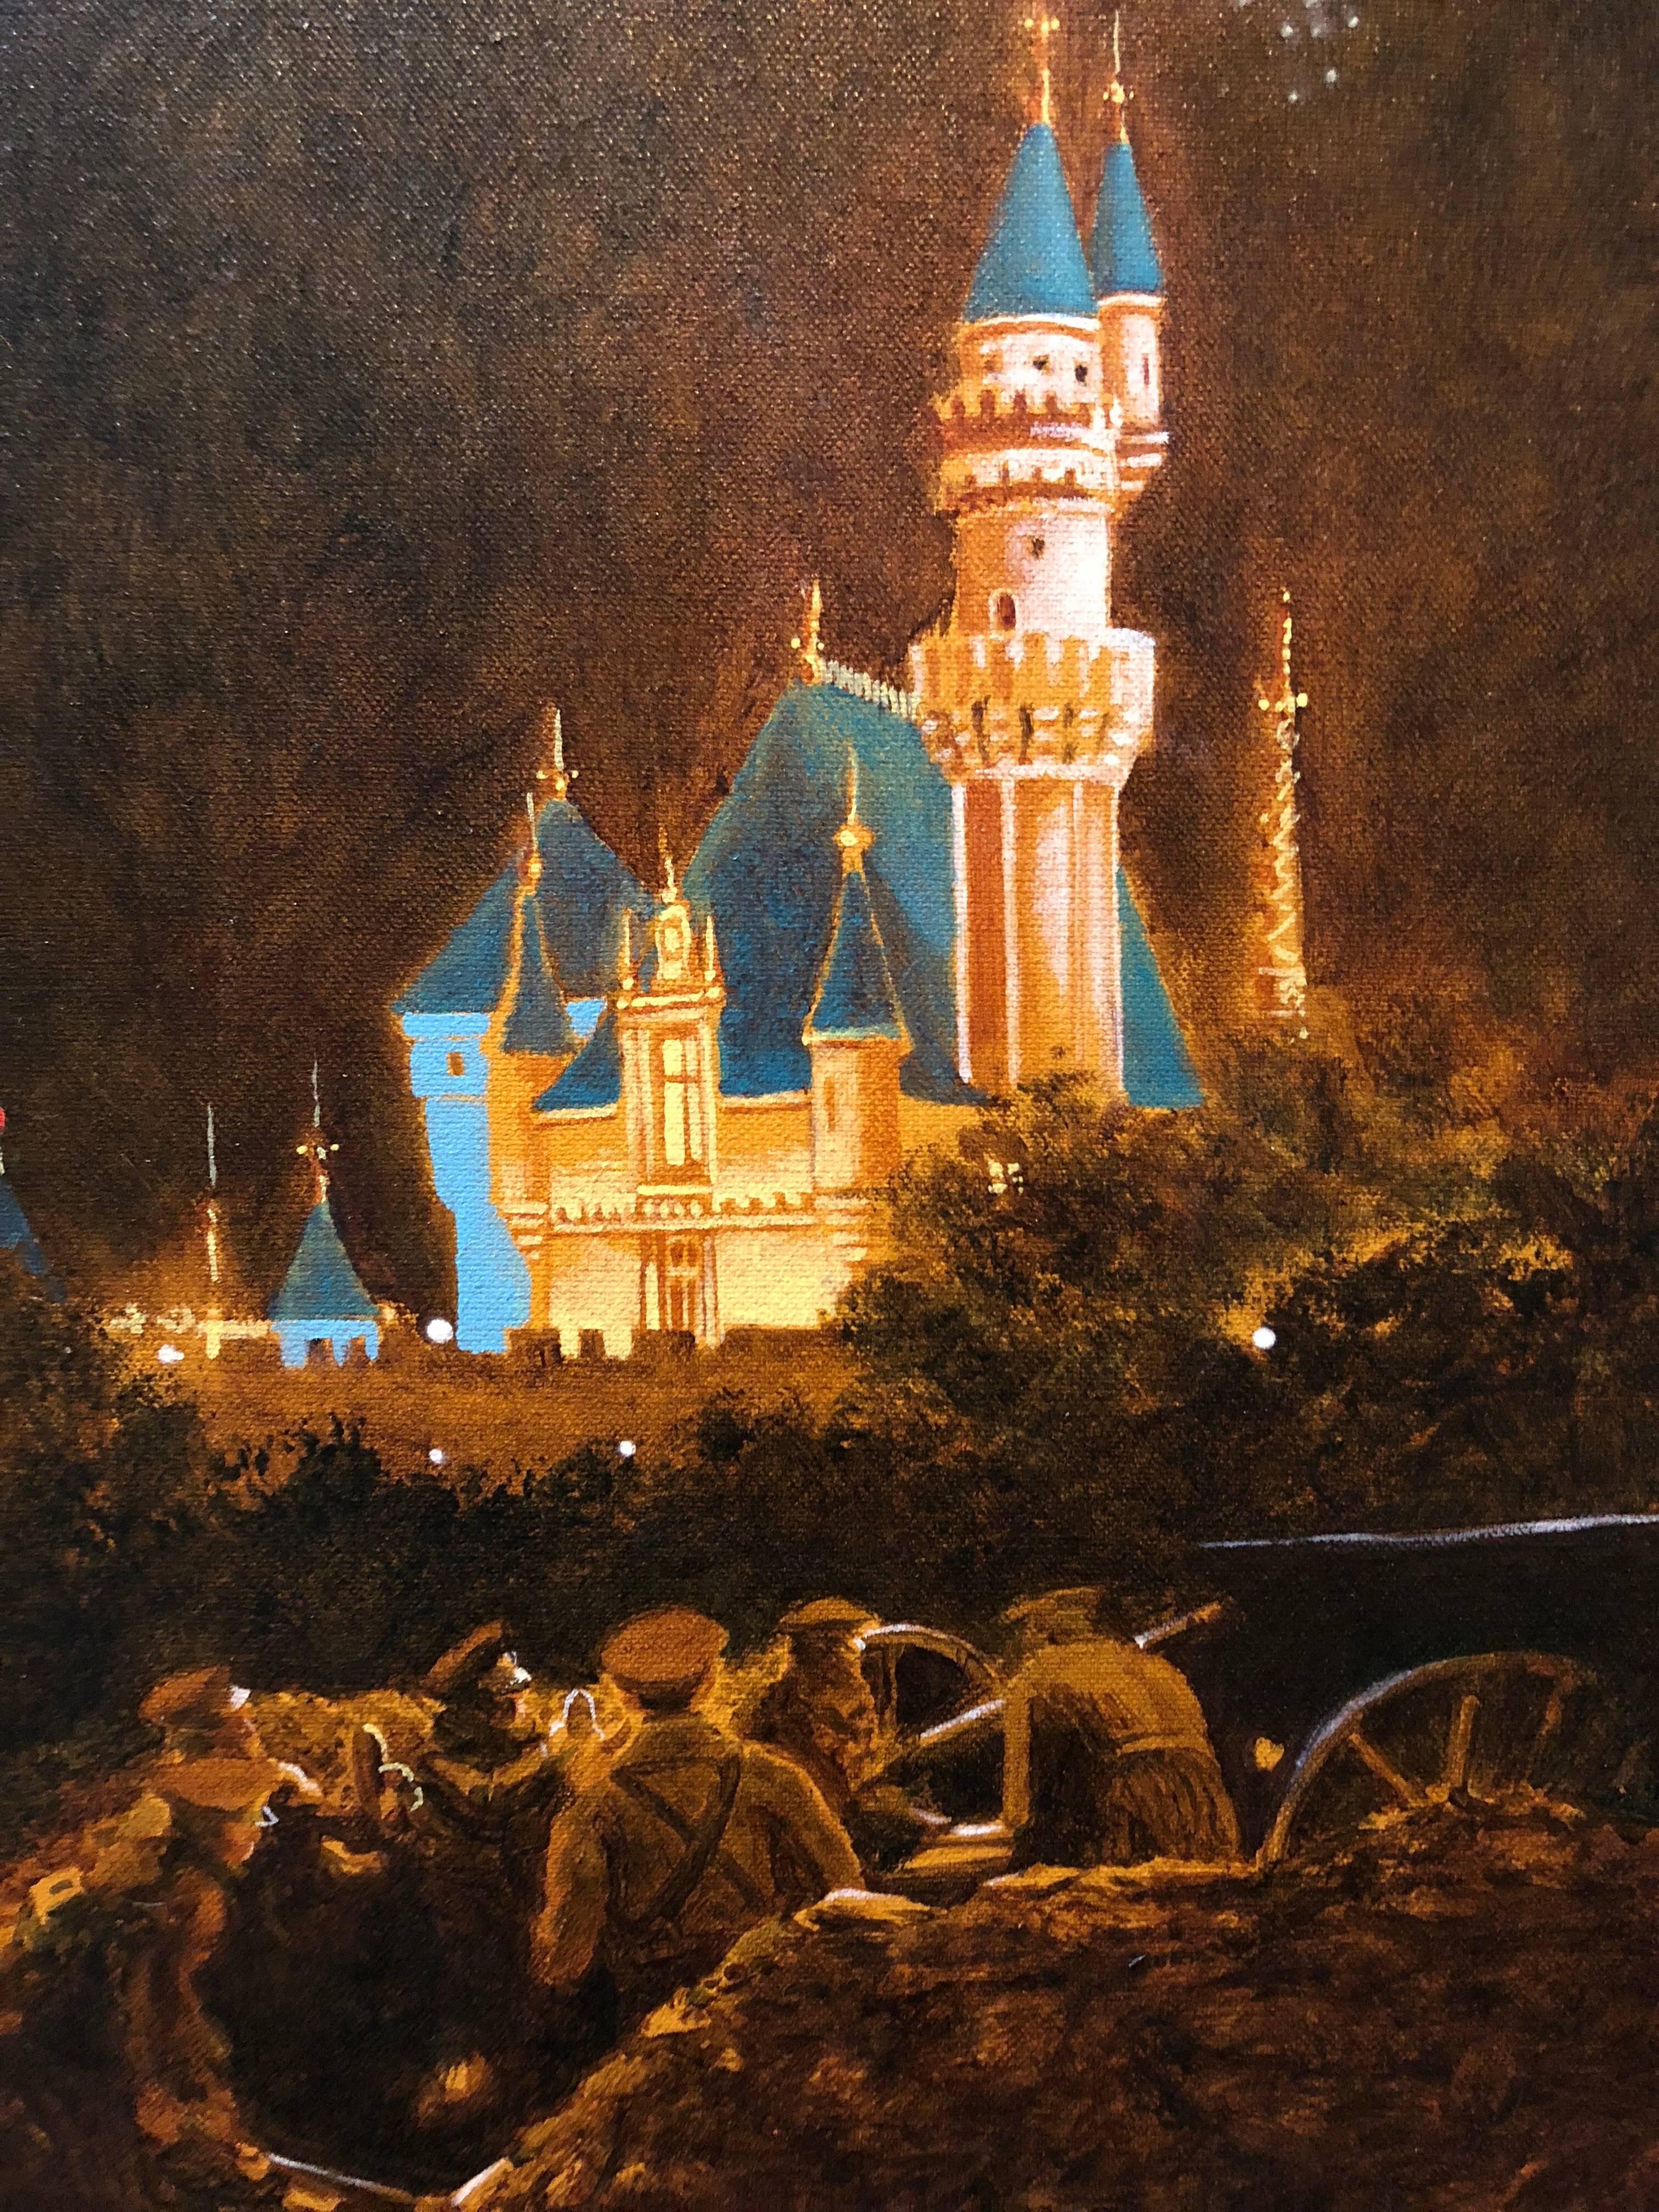 John Bowman Figurative Painting - October, Night Scene with Castle and Soldiers Oil Painting